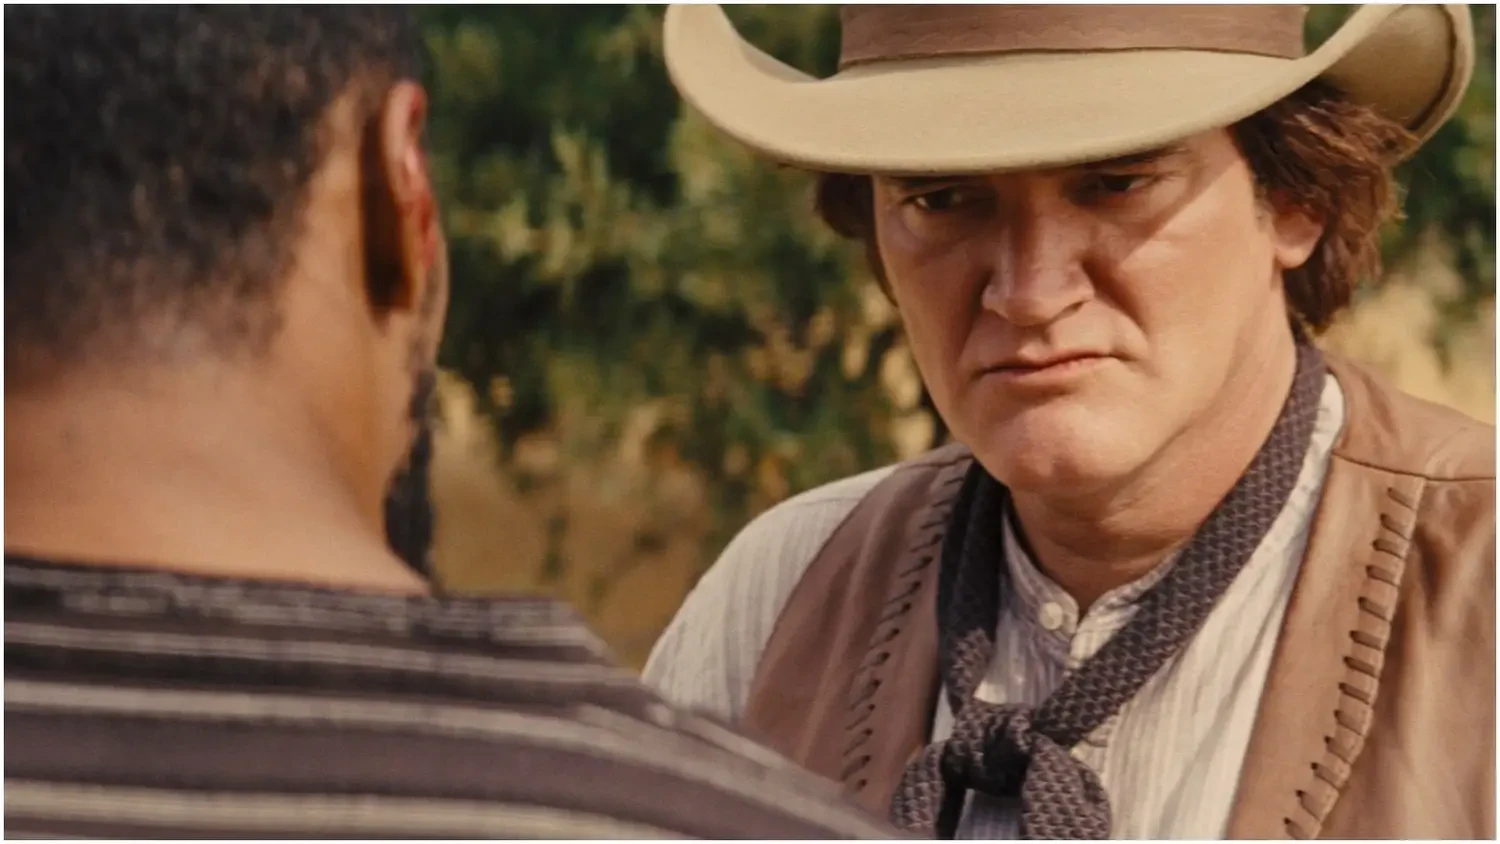 Quentin Tarantino in a still from Django Unchained